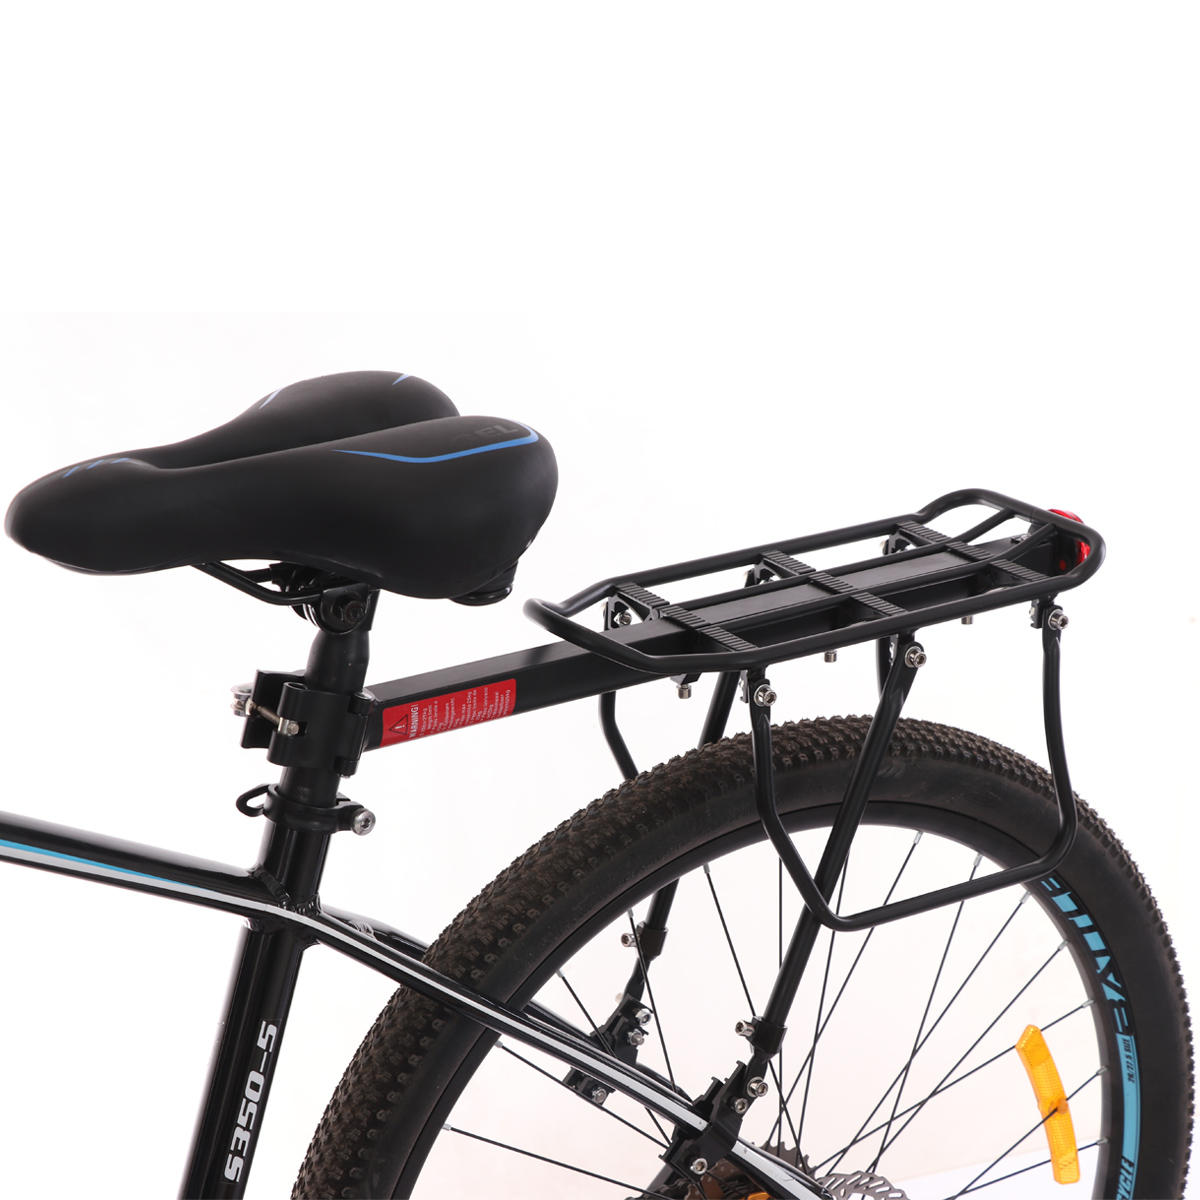 

BIKIGHT Cycling Bicycle Mountain Bike Seat Post Rear Rack Mount Pannier Luggage Carrier Max Load 50KG